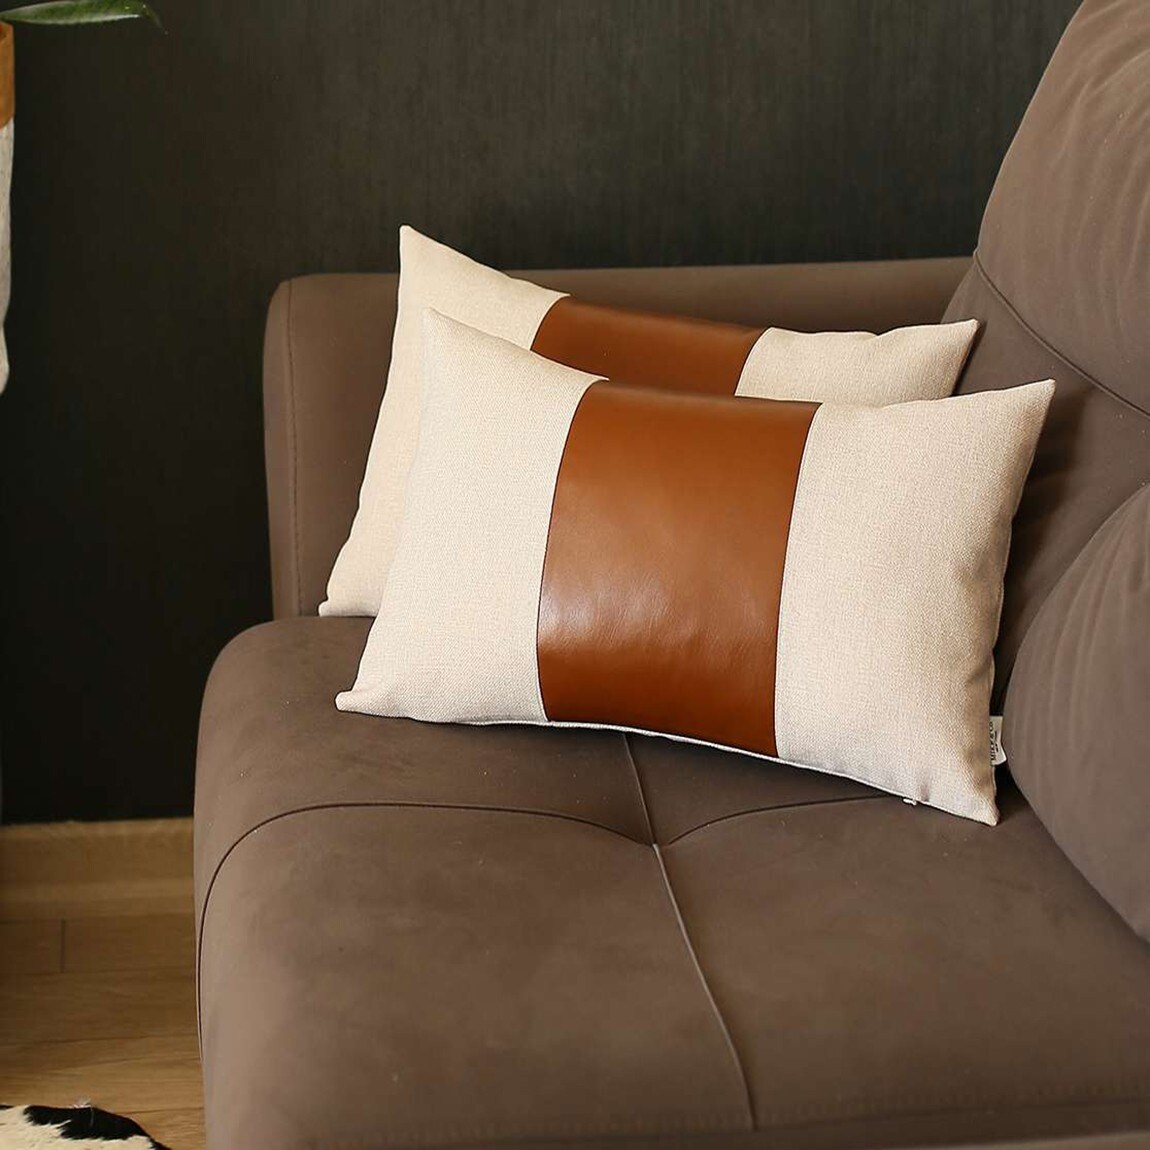 https://ak1.ostkcdn.com/images/products/is/images/direct/09ad1bee0ce3608bafa58065476acdfcb578ea22/Set-of-2-Faux-Leather-Lumbar-Pillow-Covers.jpg